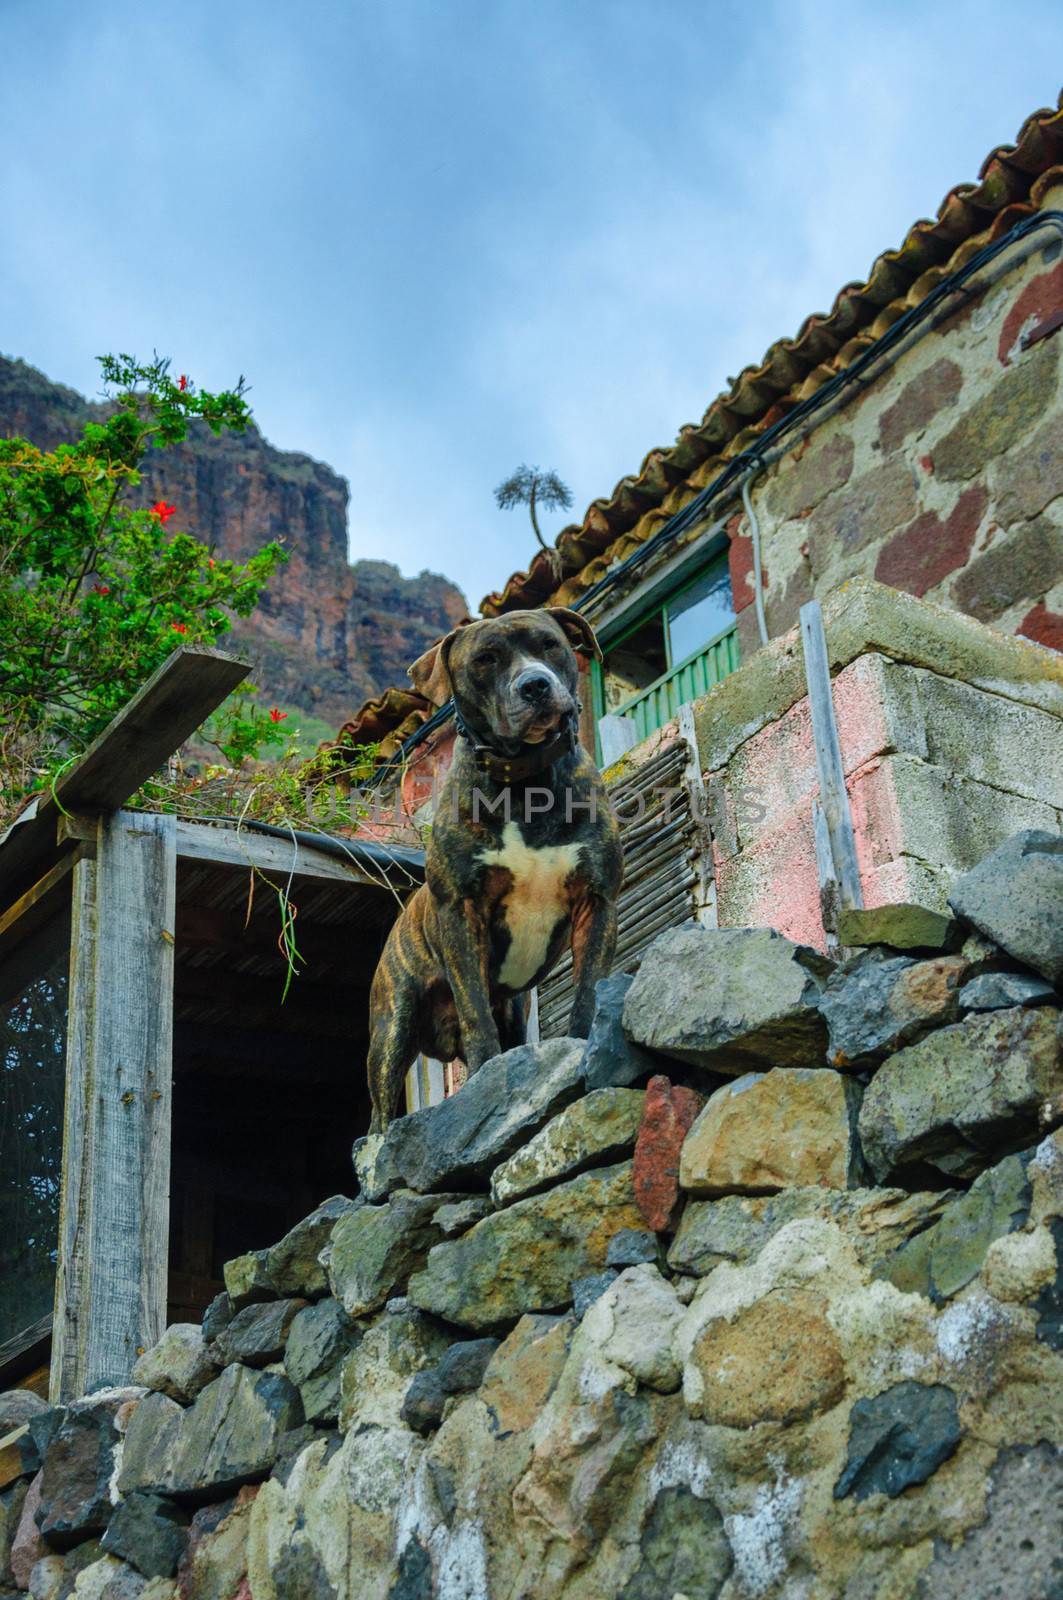 Dog on the street of Masca village, Tenerife, Canarian Islands by Eagle2308